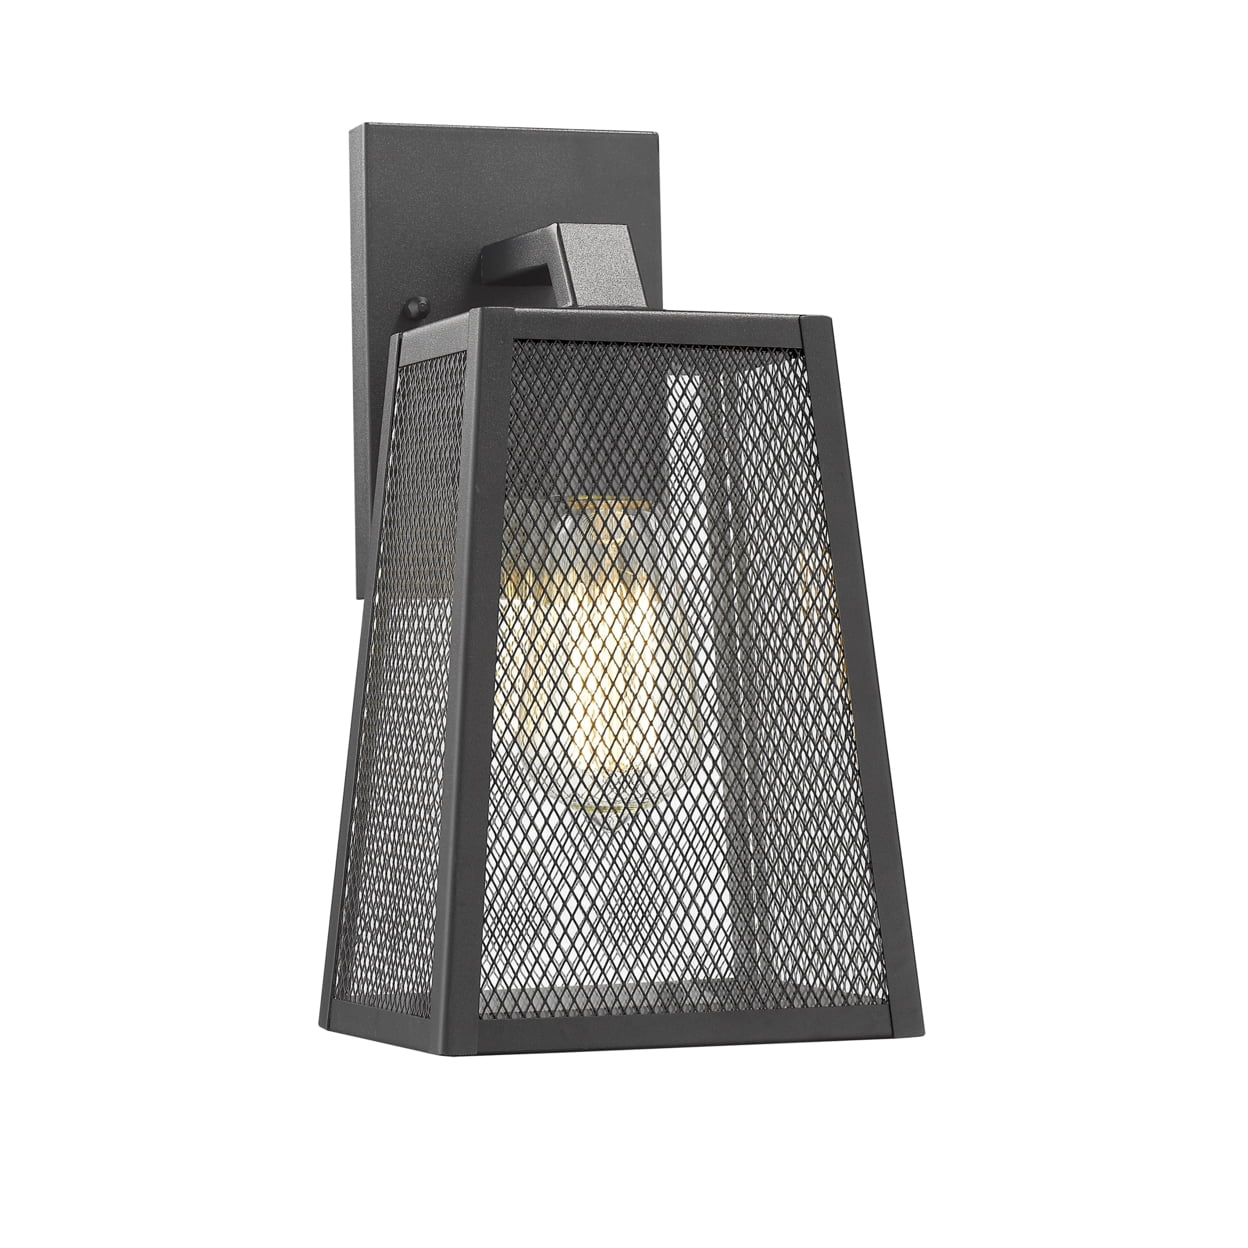 Ch2d286bk12-od1 Emerson Industrial 1 Light Textured Black Outdoor Wall Sconce - 12 In.